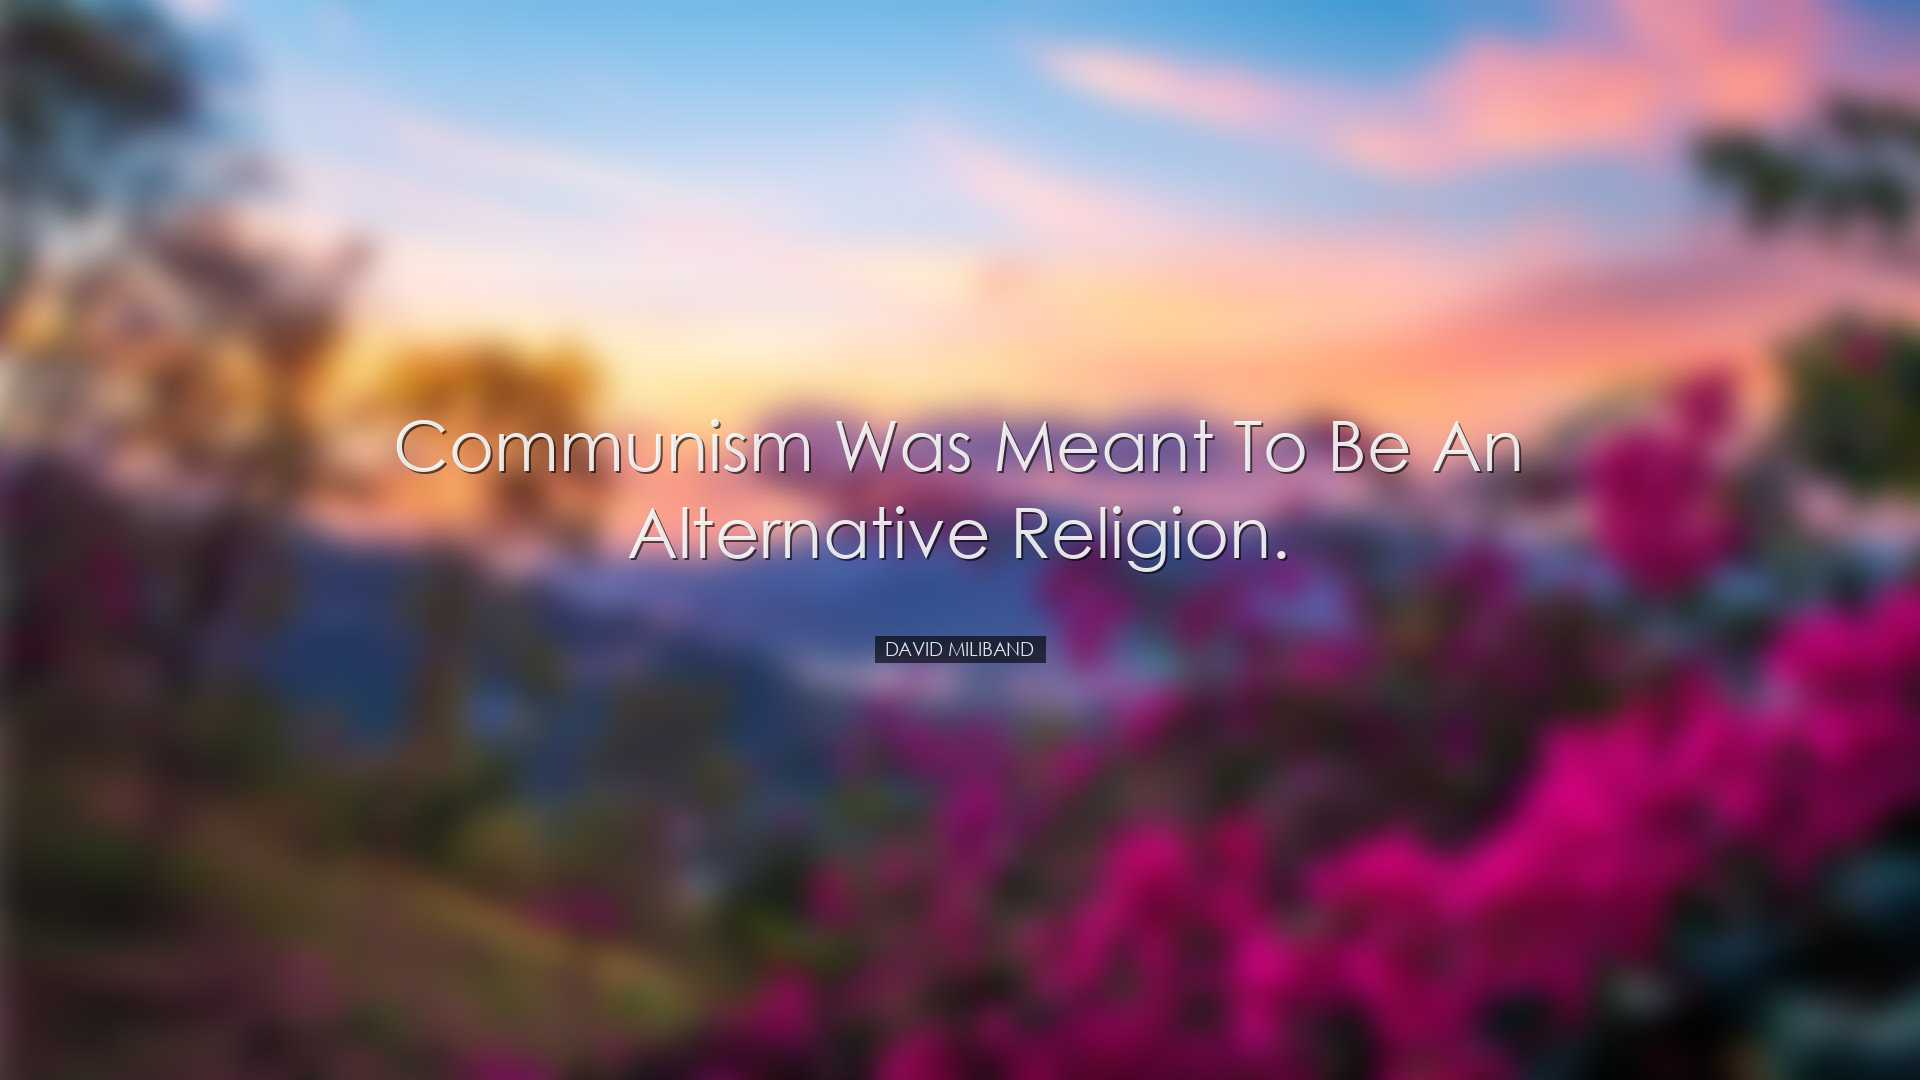 Communism was meant to be an alternative religion. - David Miliban